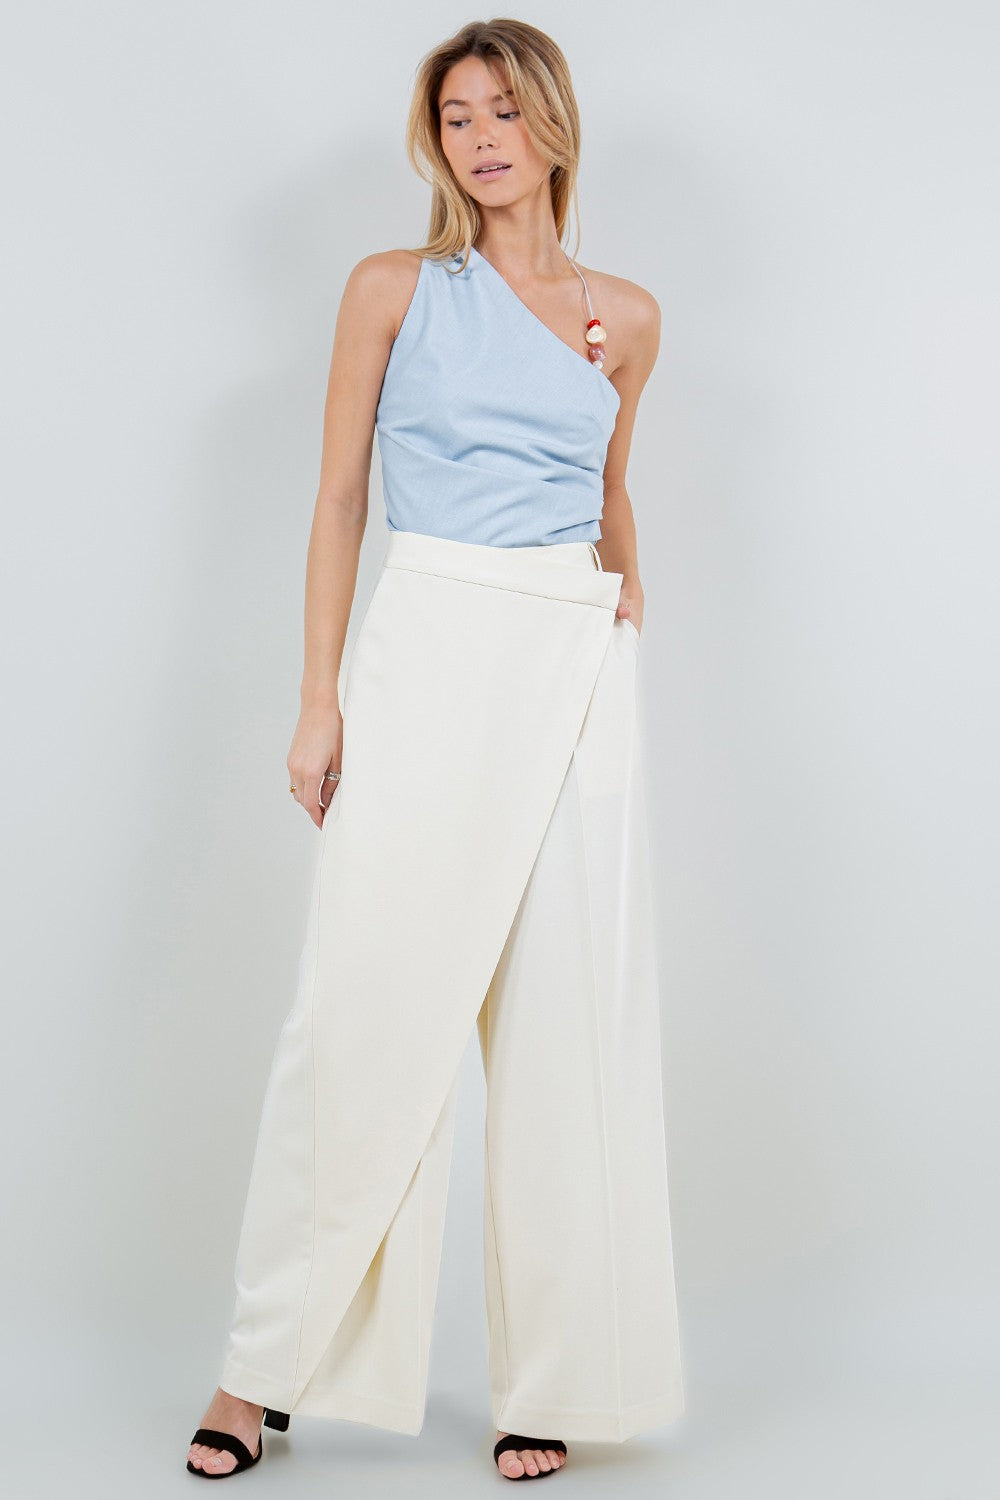 Blue One Shoulder Top | Collective Request 